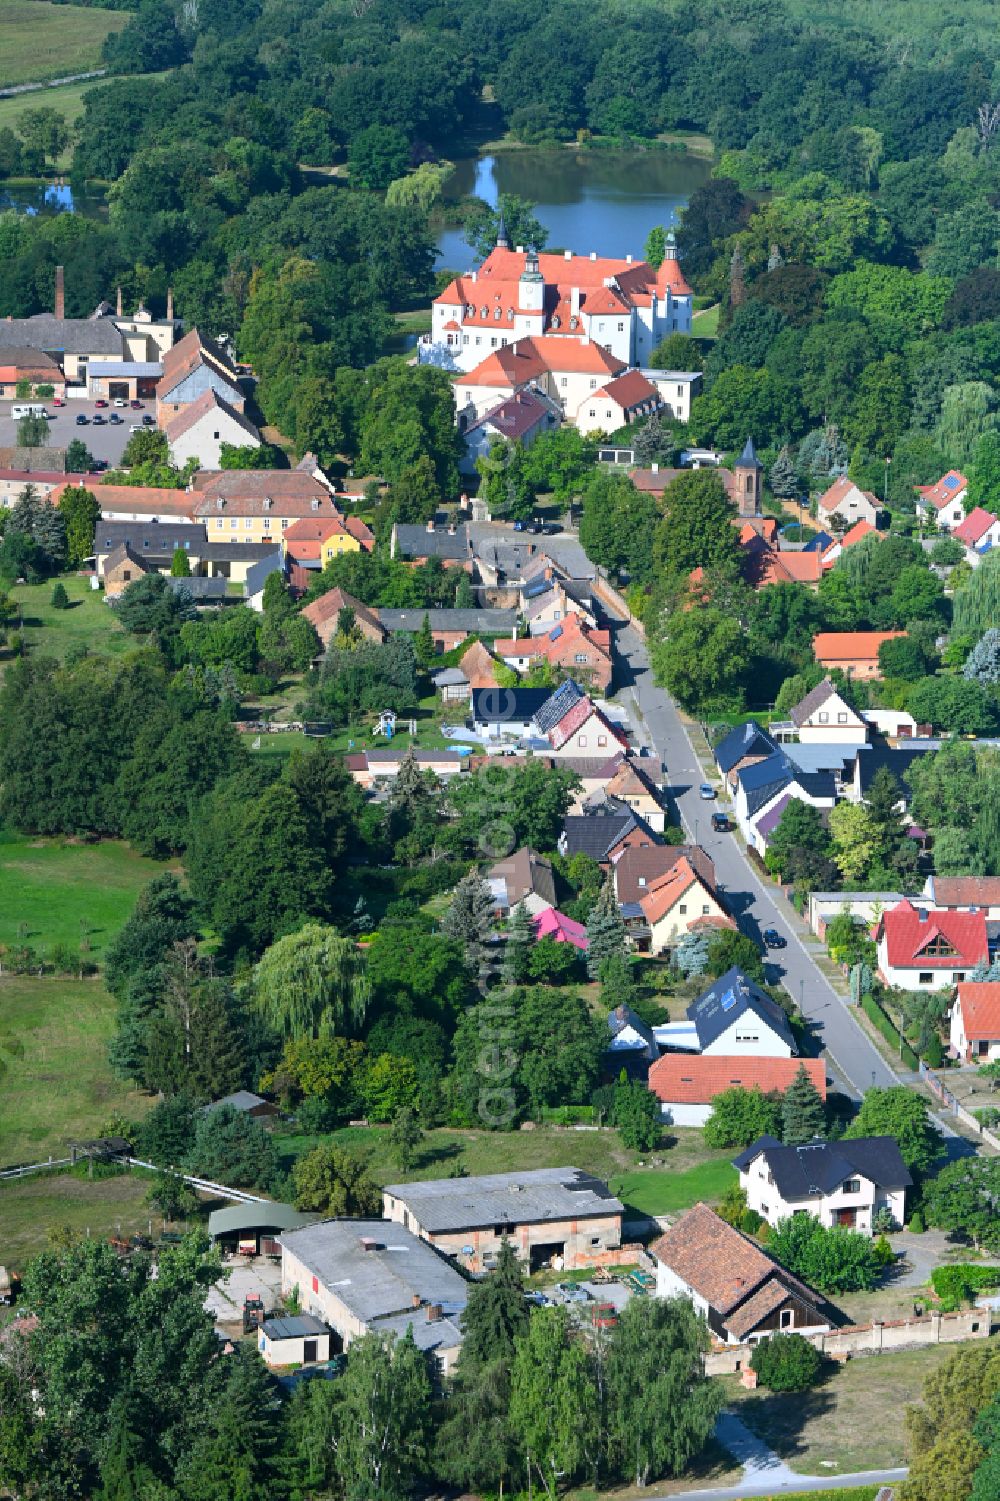 Luckau from above - City view of the streets and houses of the residential areas along the Alte Calauer Strasse and moated castle in Fuerstlich Drehna in the state Brandenburg, Germany